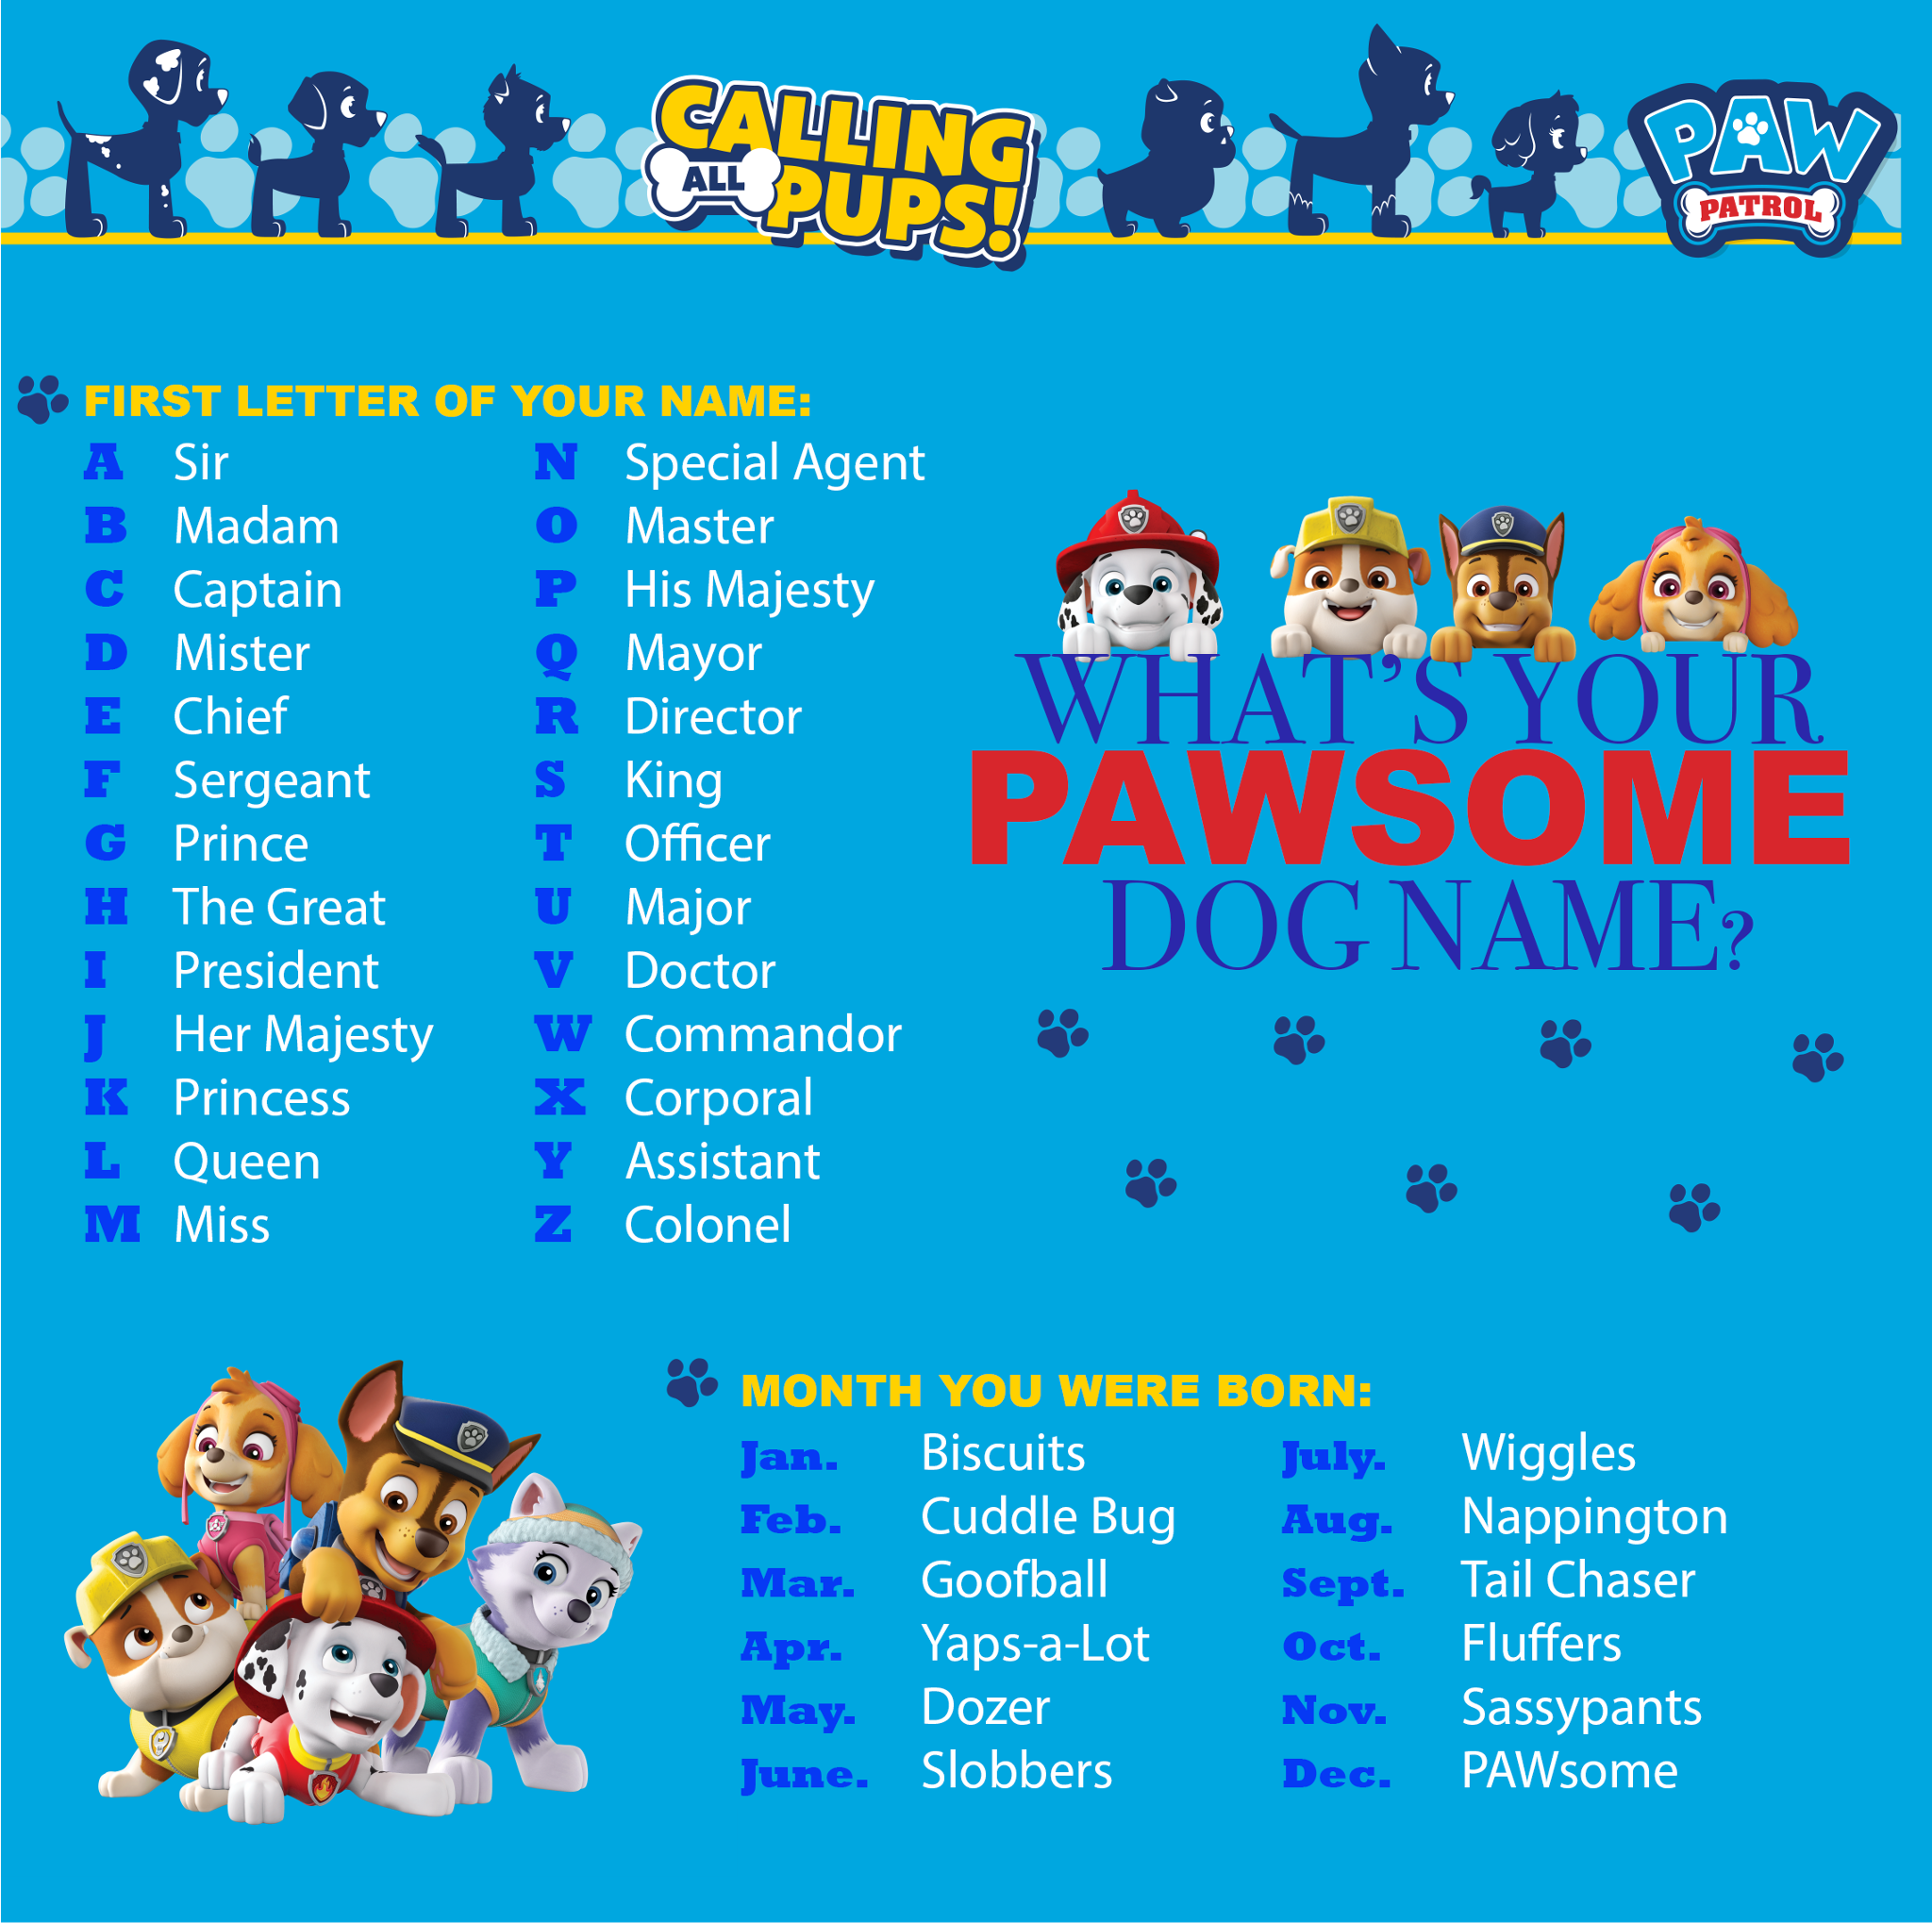 PAW Patrol on Twitter: "What's your PAWsome dog name? 🐶 #PAWPatrol… "